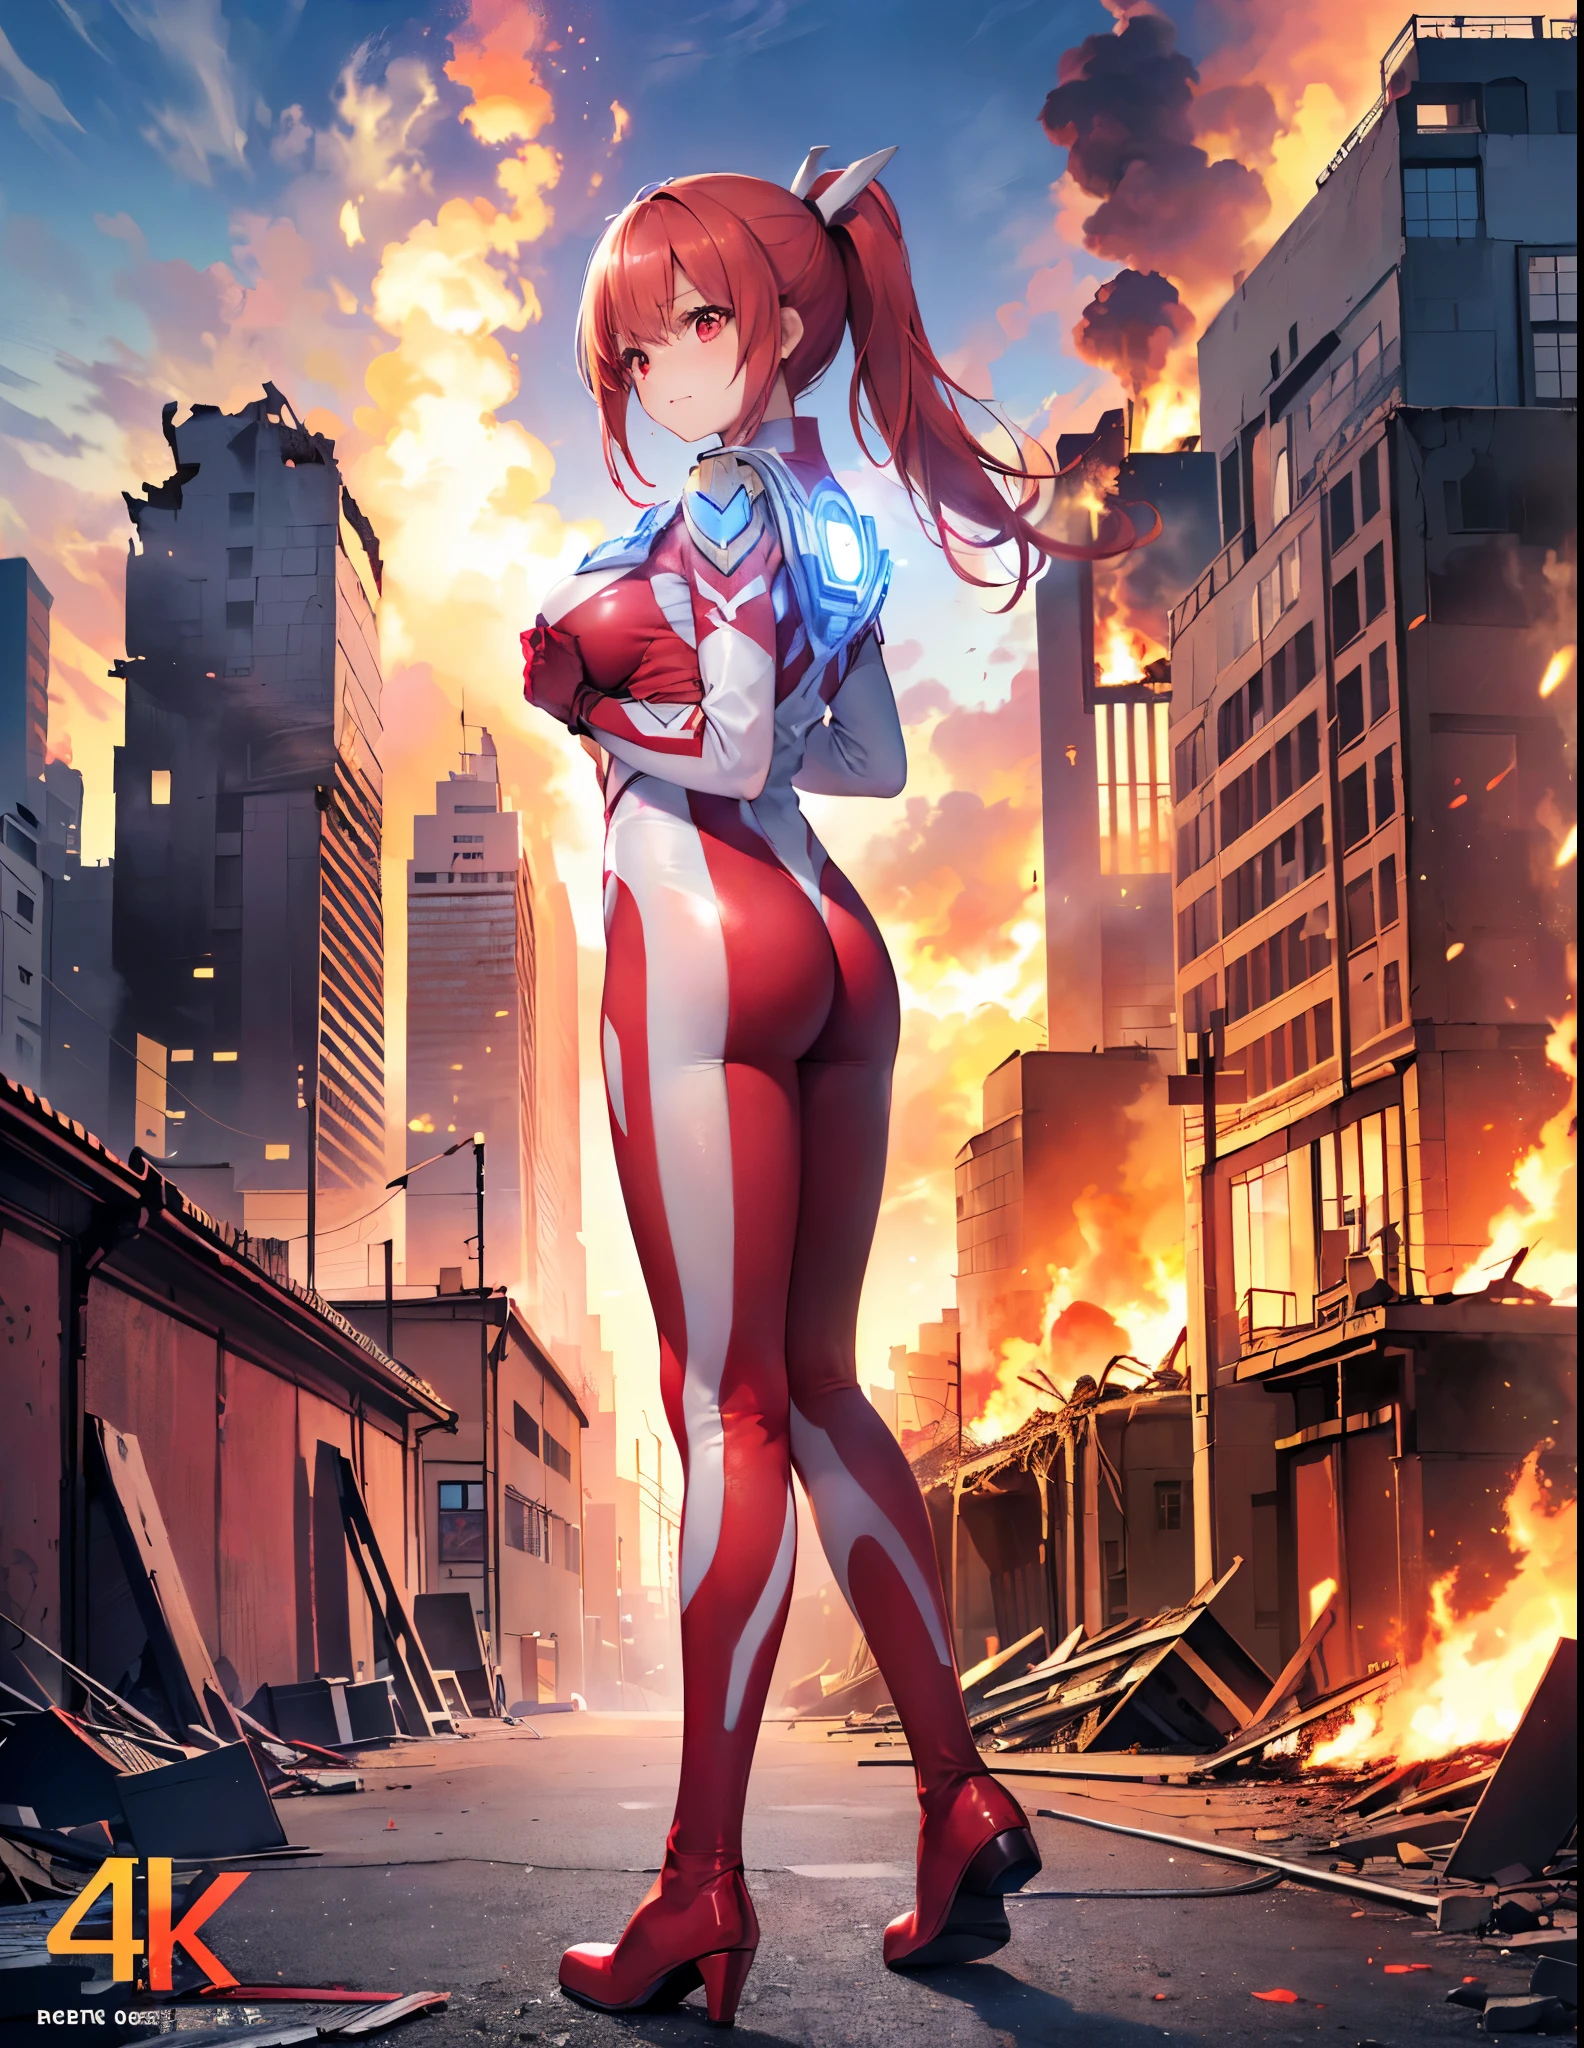 Realistic,Highest quality, Ultra Detail, High-quality CG rendering, The most delicate and beautiful, Floating softly, High resolution, (1 giant girl), (Highest quality,4K,8K,masterpiece:1.2),(All red hair:1.5), (ponytail:1.5),(Red eyes:1.5), (Ultra Girl:1.0), (Red Ultraman bodysuit:1.4),(Do not expose your skin:1.4),(Slightly larger breasts:1.5),(Place your hands in front of your chest:1.3),(Red gloves:1.3),(Red Shoes:1.3),(whole body:1.3),(Are standing:1.3),(A city engulfed in flames:1.3),(Buildings in flames:1.3),(Burning Ruins:1.3),(Fighting Pose:1.3),(Put your right hand forward:1.3),(Turn your back to your audience:1.3),Butt